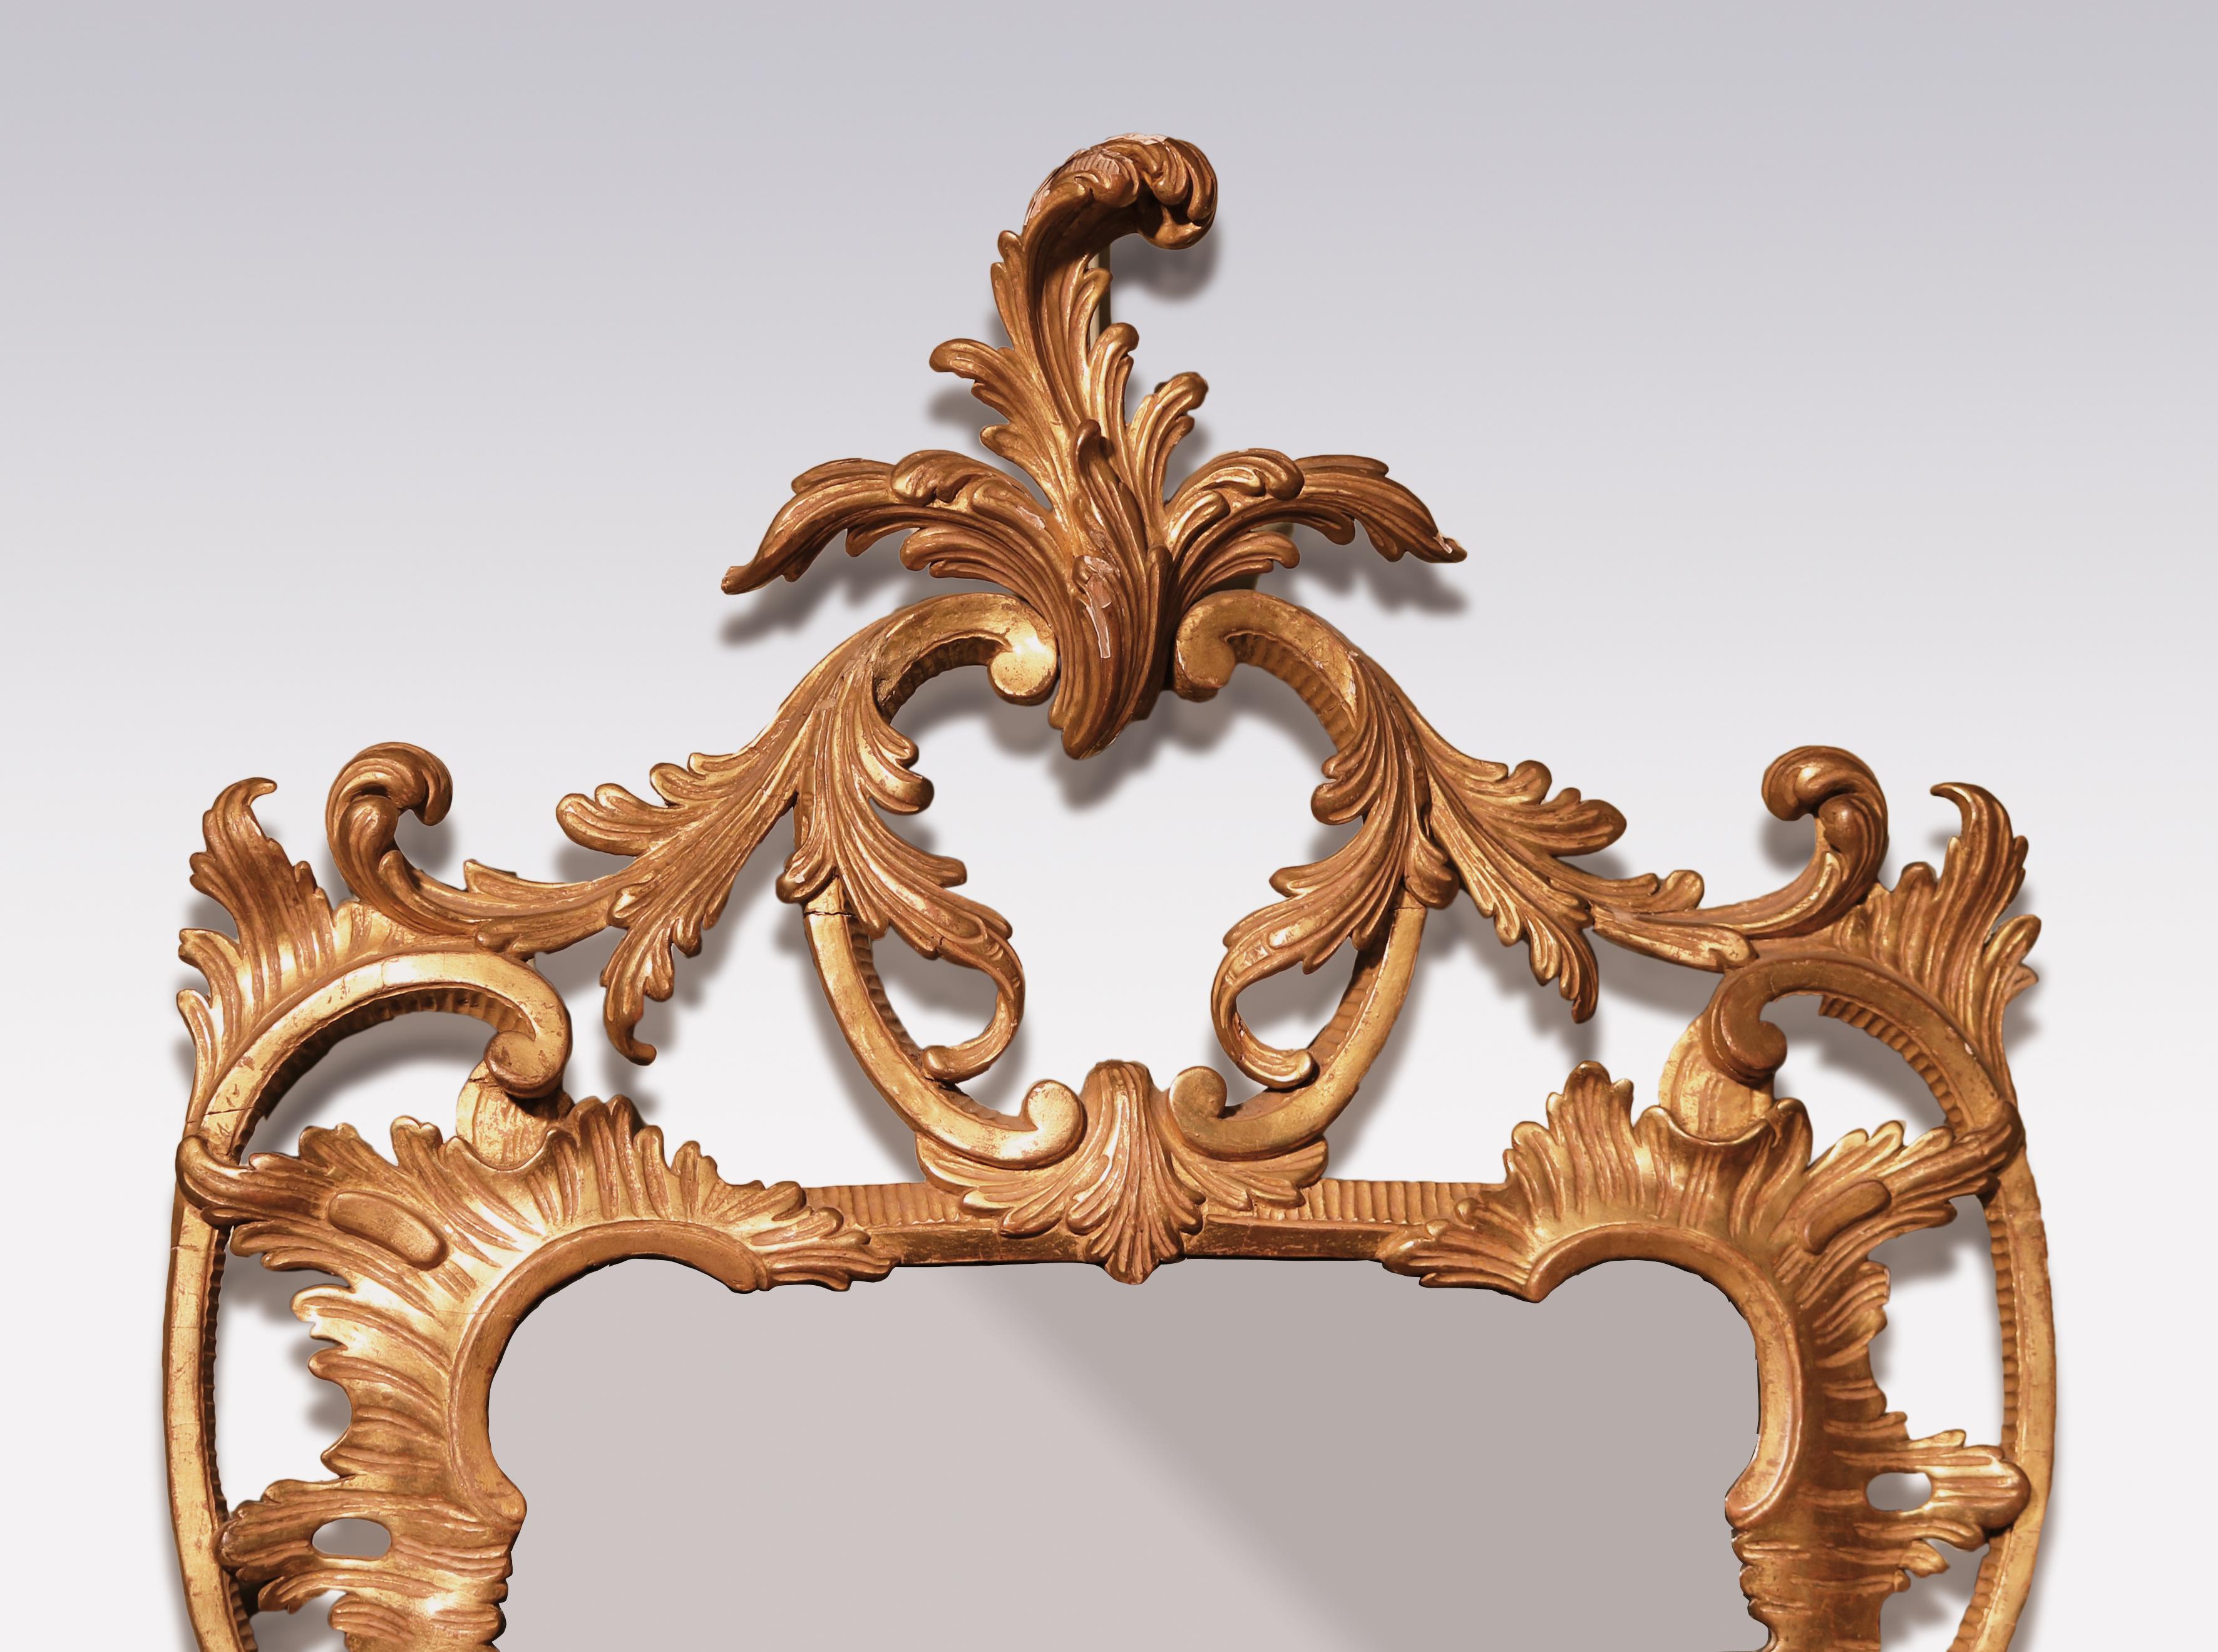 A fine quality mid 18th century Chippendale period carved giltwood Mirror, having leaf scrolled cartouche above shaped frame flanked by fruit and flower borders with pierced “C” scroll below.

